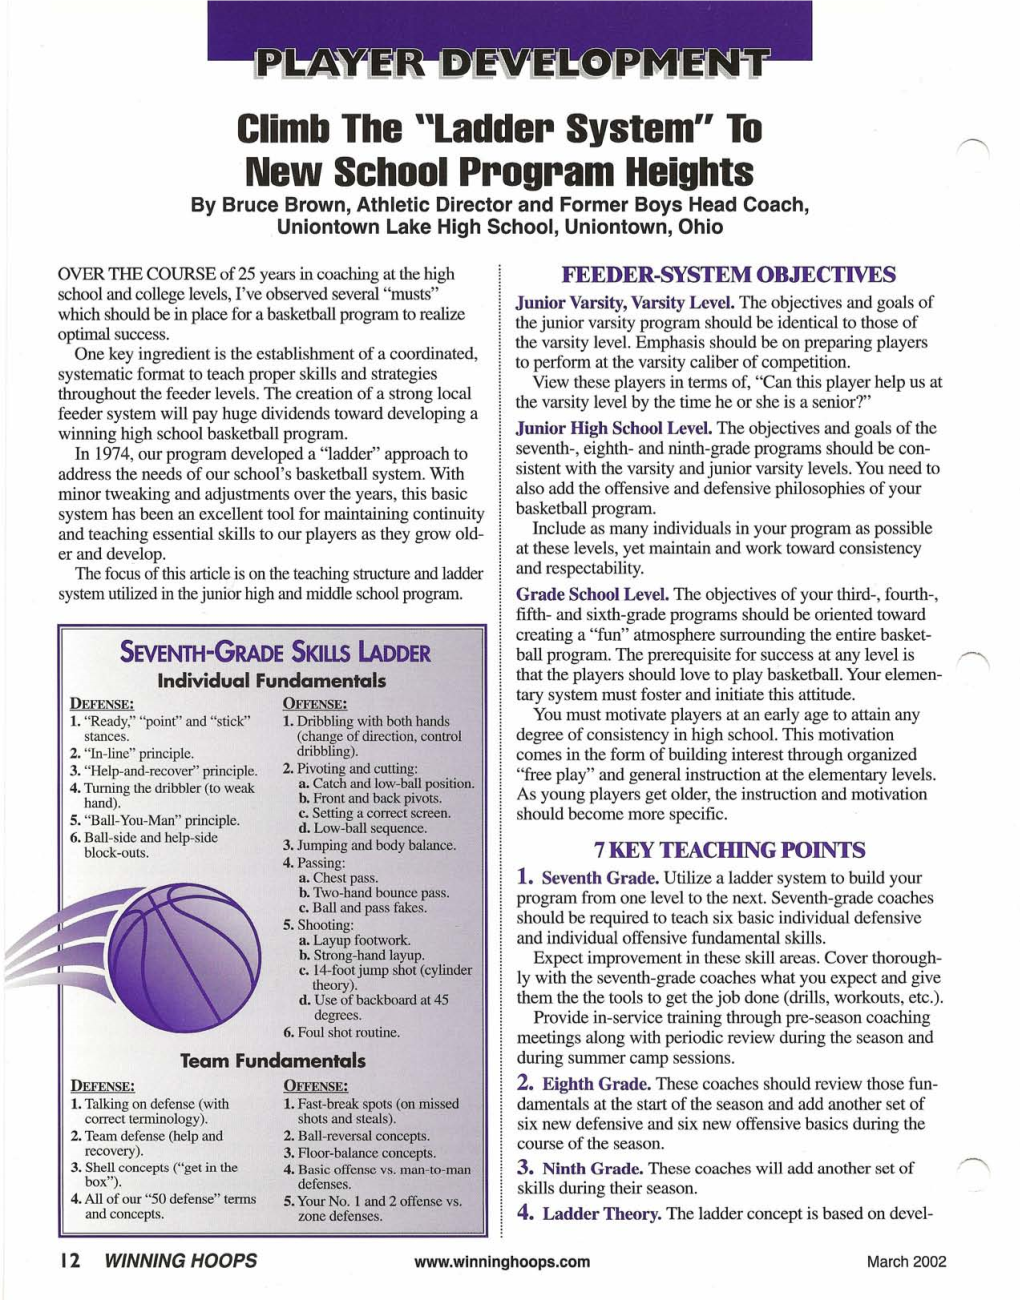 Climb the "Ladder System" to New School Program Heights by Bruce Brown, Athletic Director and Former Boys Head Coach, Uniontown Lake High School, Uniontown, Ohio